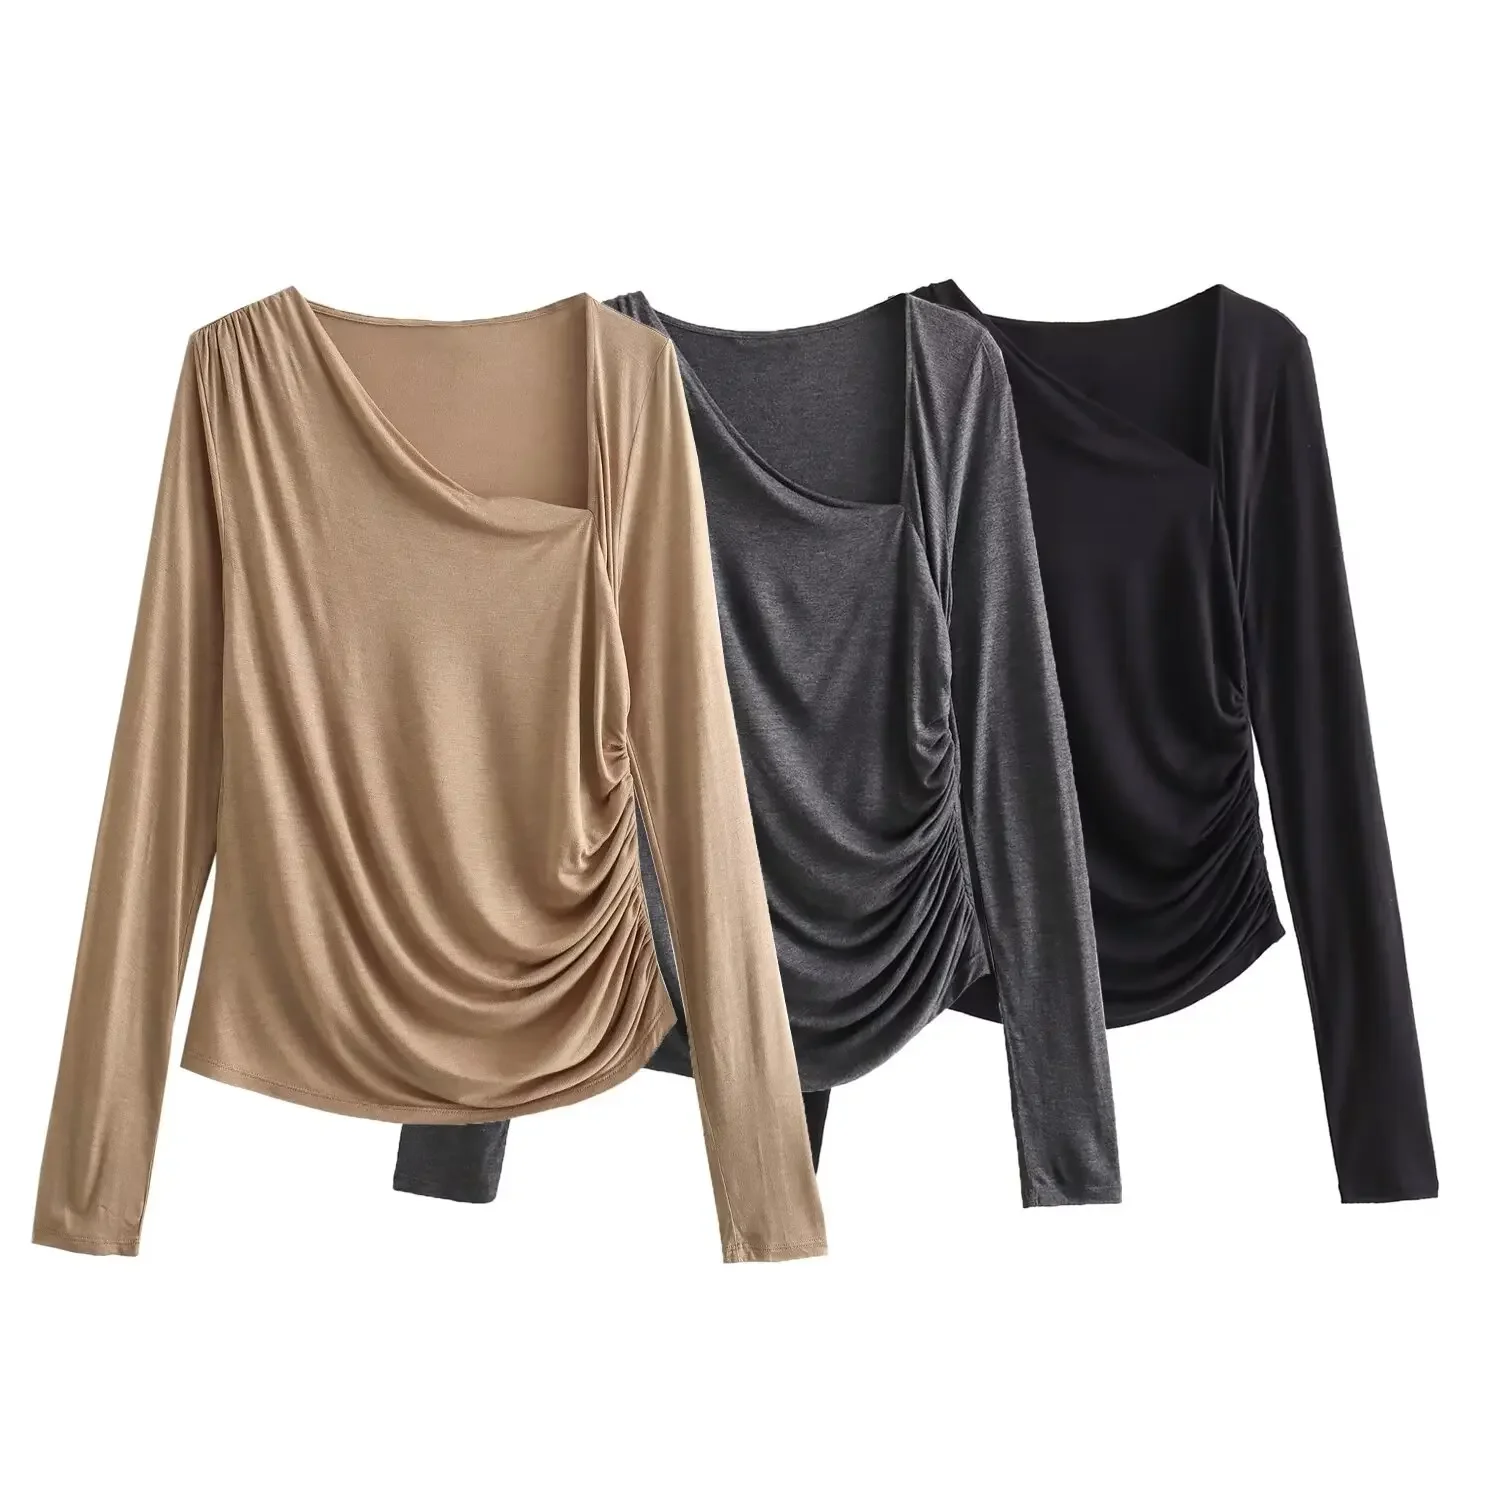 

Women New Fashion Asymmetric neckline Side pleated design Knitted T-Shirt Tops Vintage Long Sleeve Female Pullovers Chic Tops